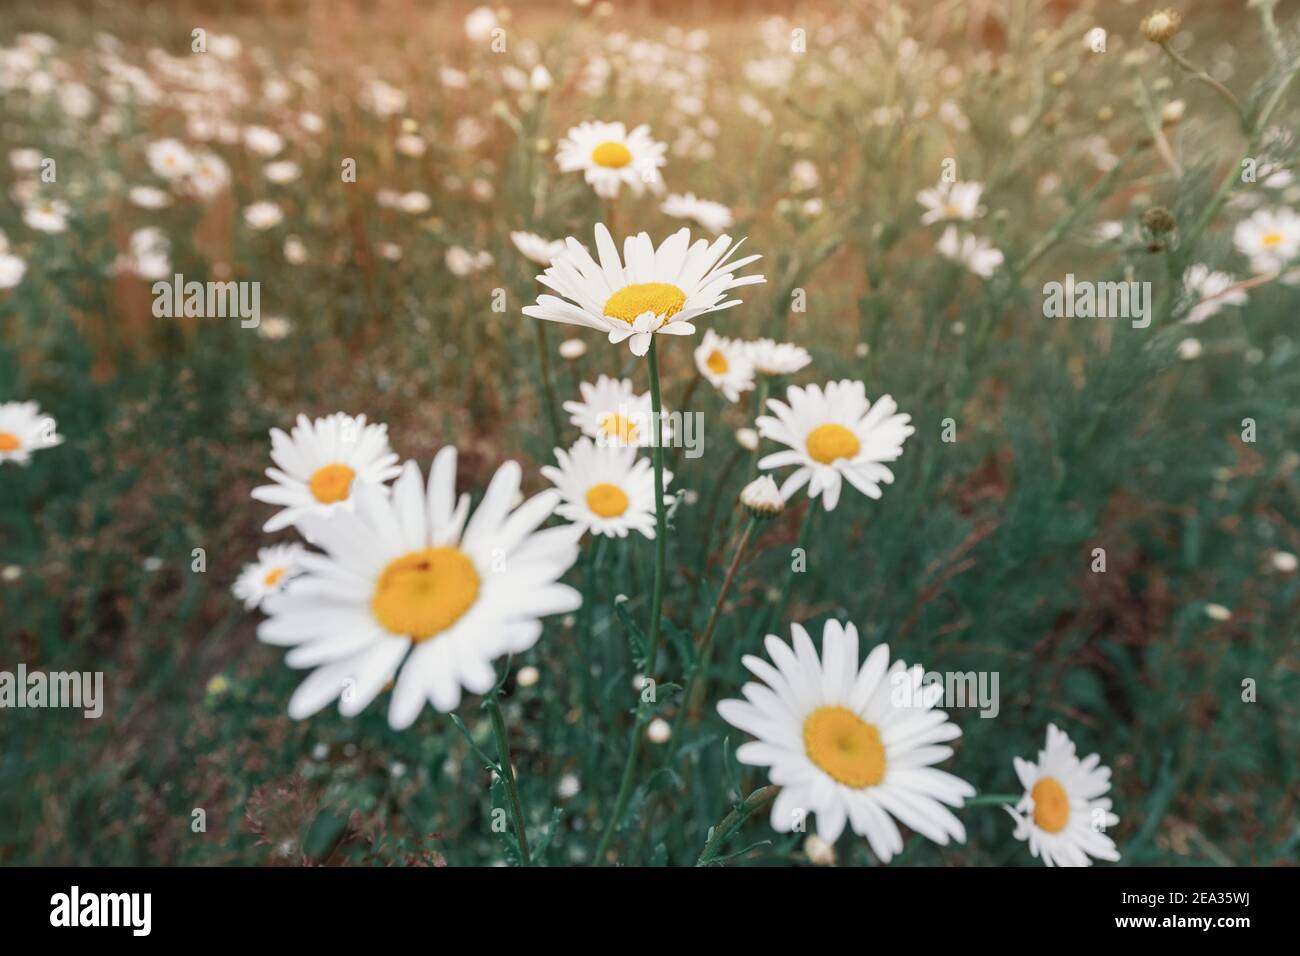 Chamomile plant blooms in a field of wild plants. Useful plants and folk medicine Stock Photo